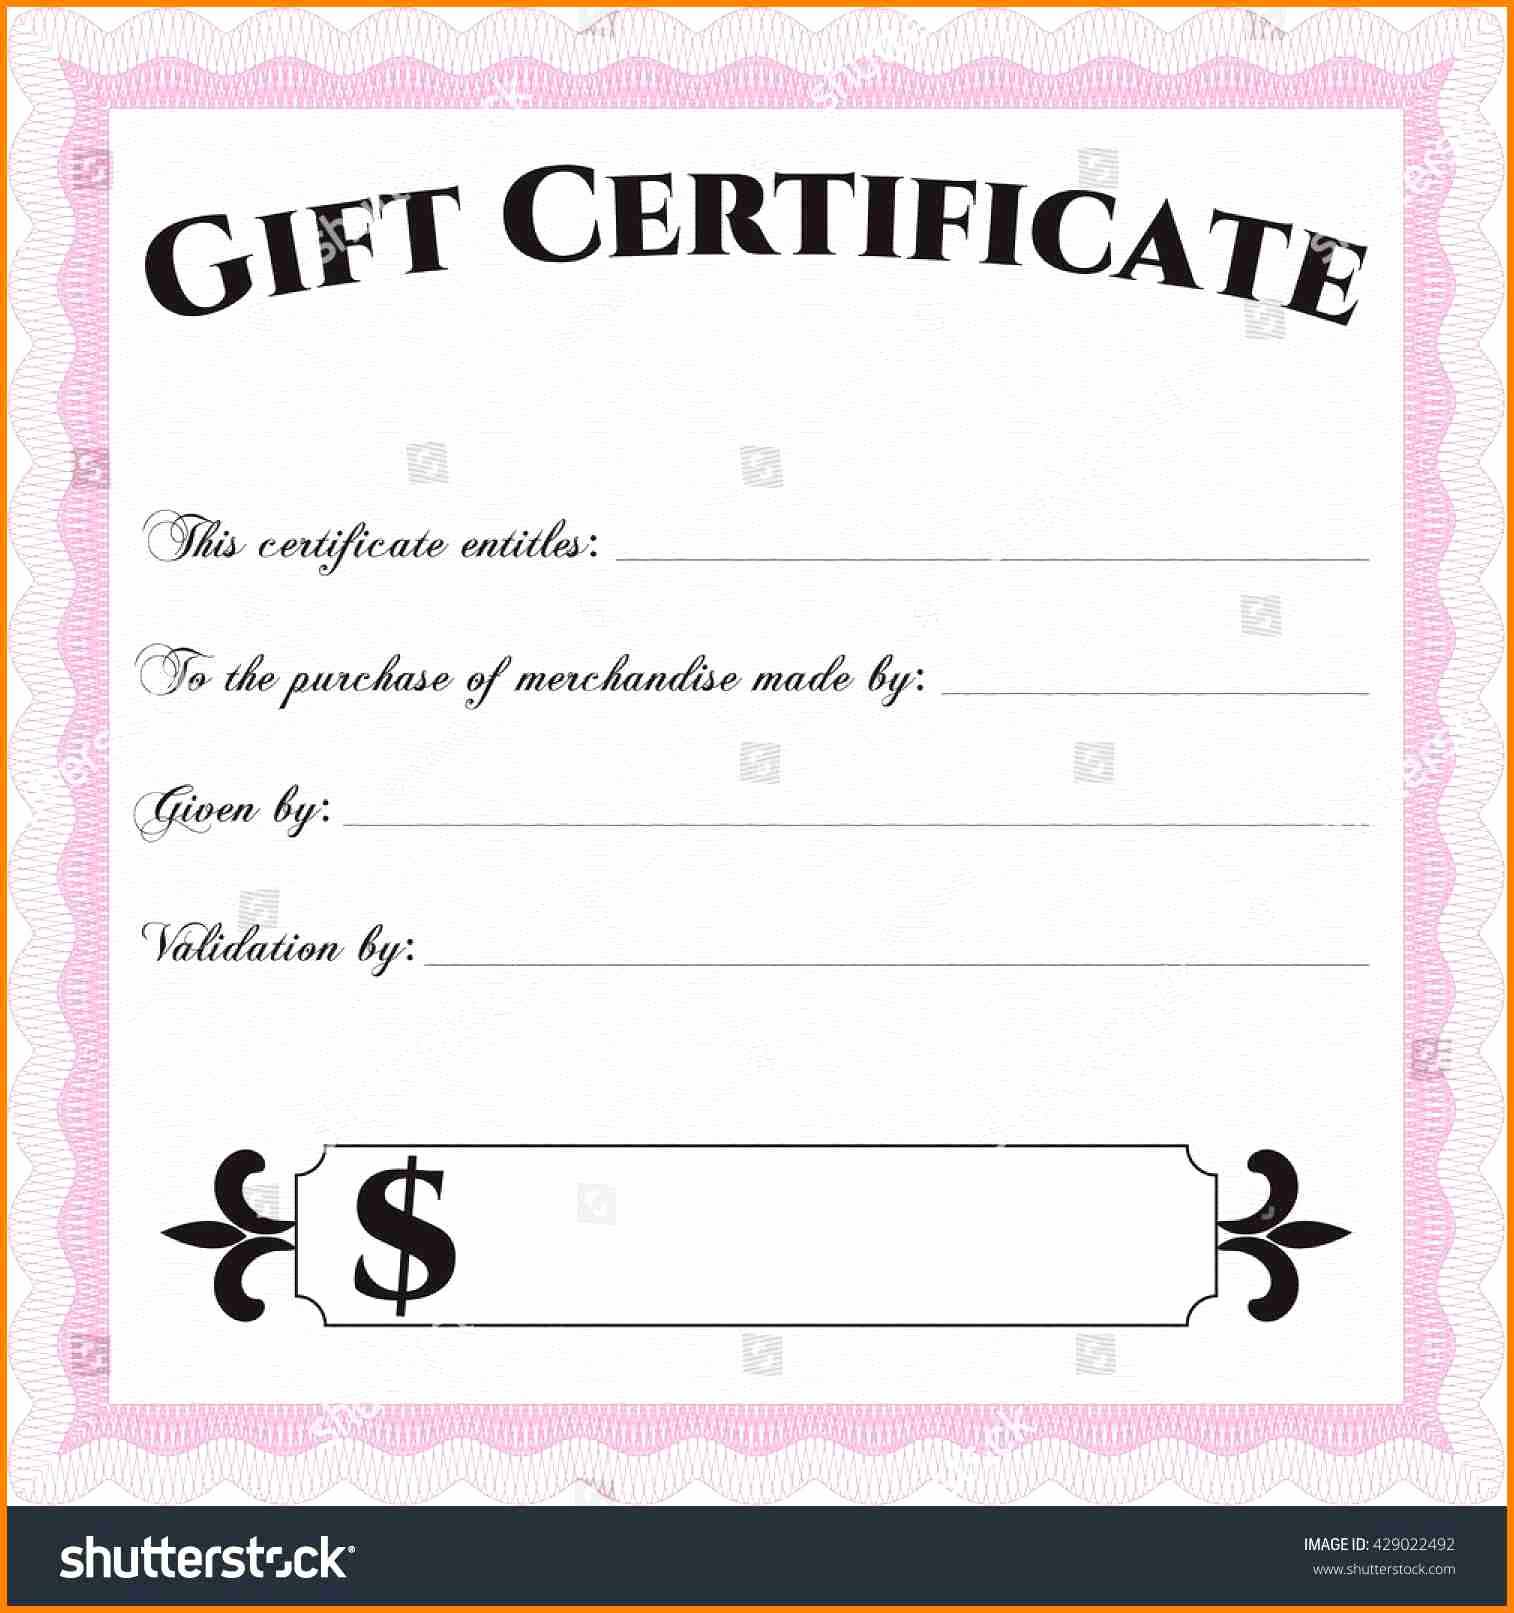 Funny Gift Certificate Template Elegant Prize Voucher Template